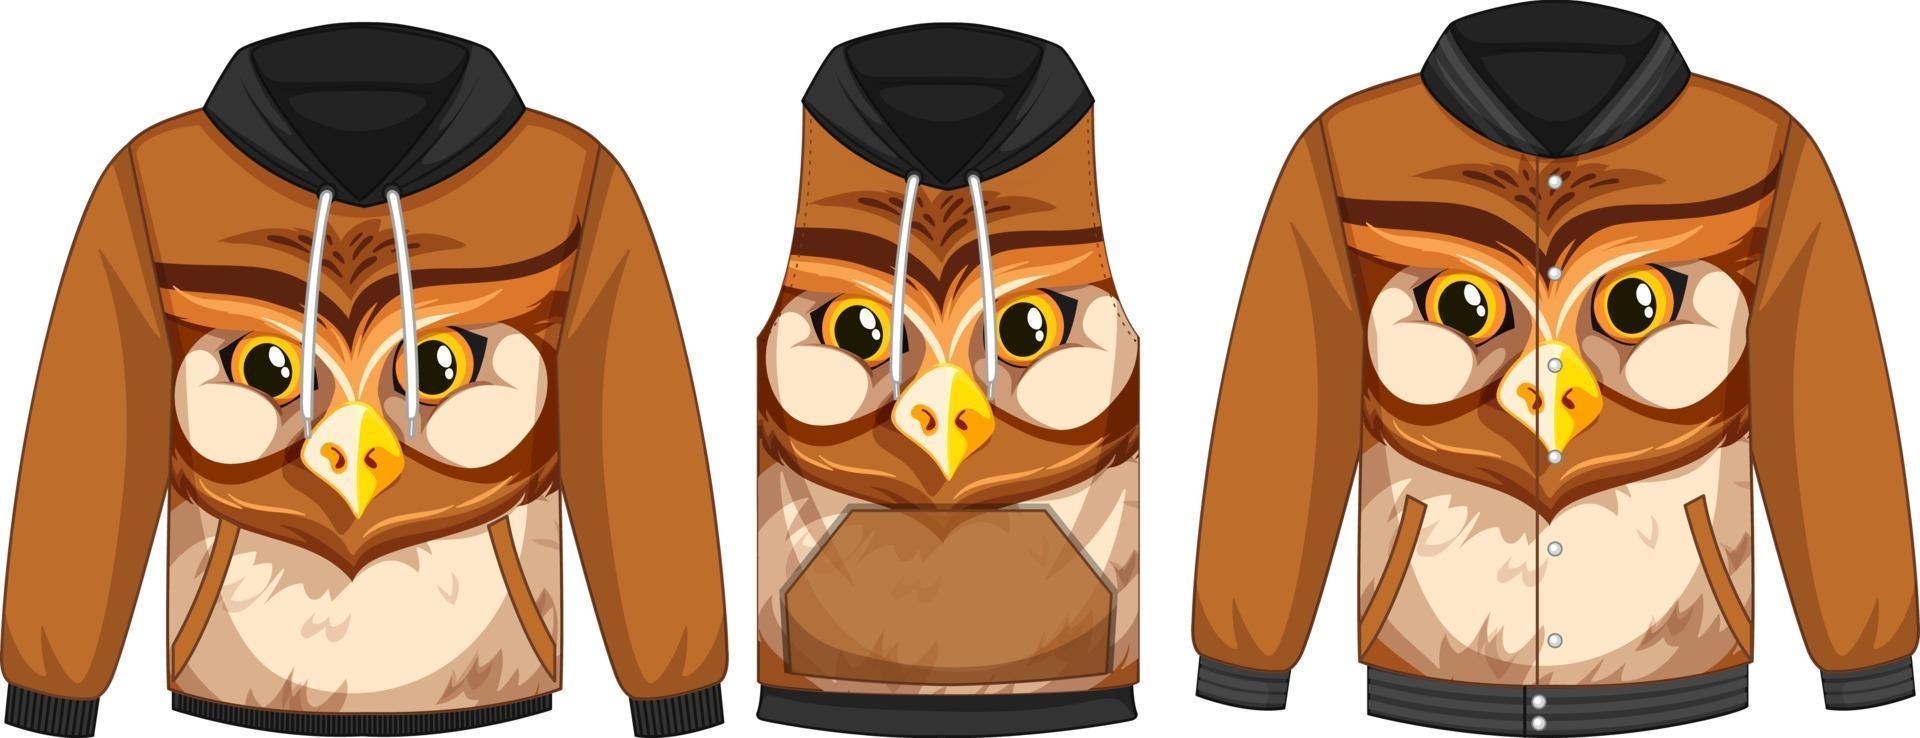 Set of different jackets with owl face template vector